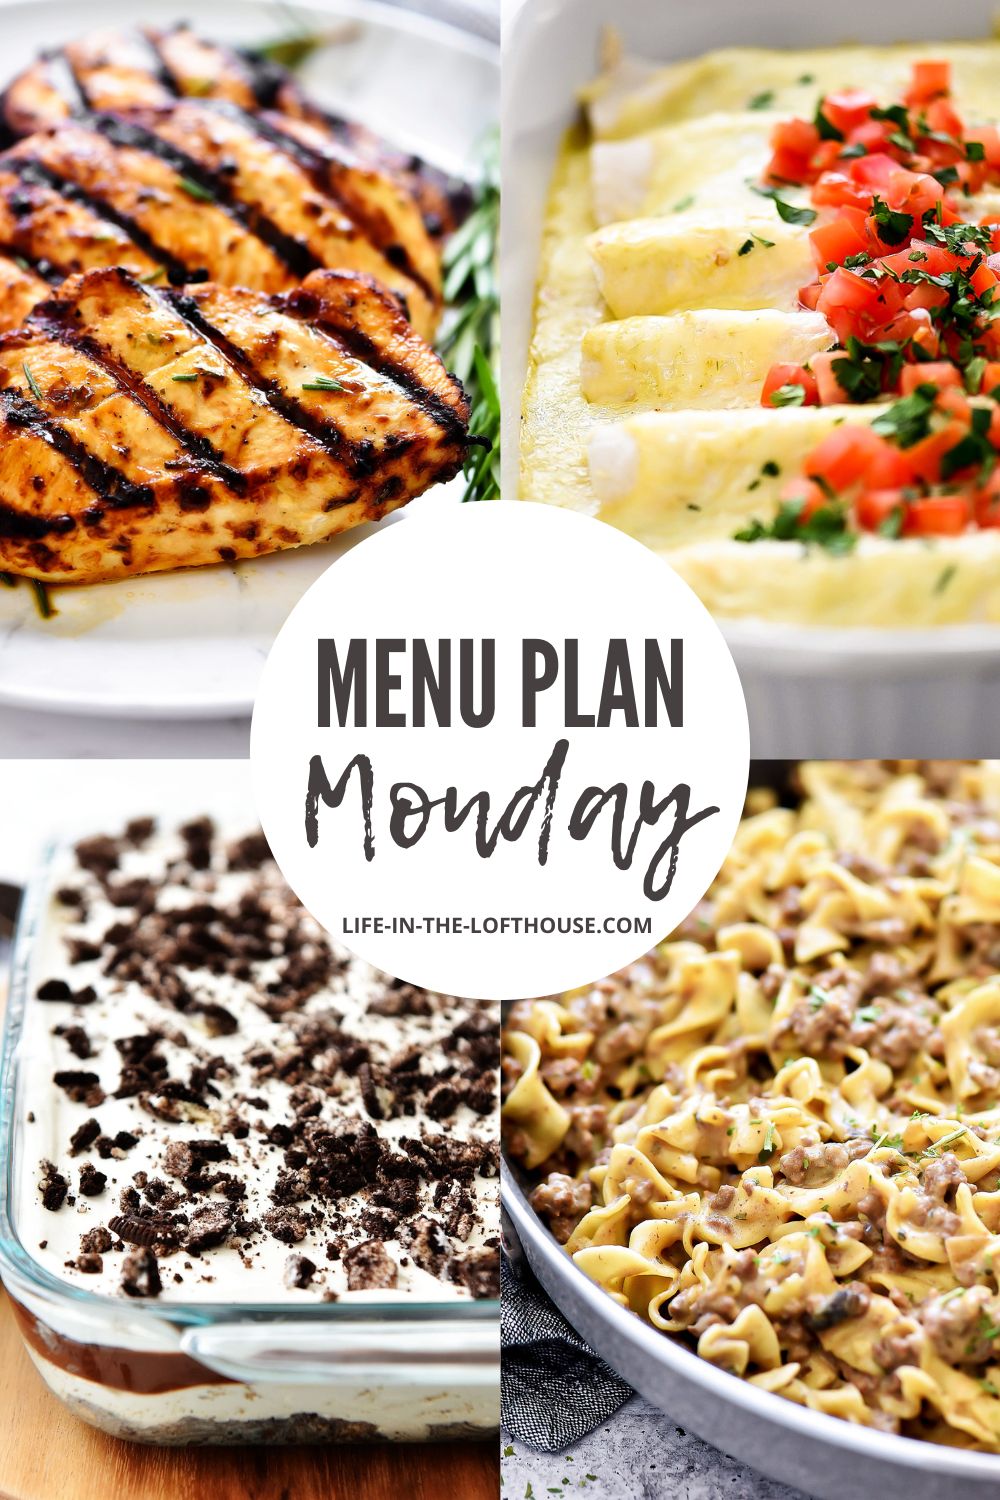 Menu Plan Monday is a list of 6 dinners and one dessert.